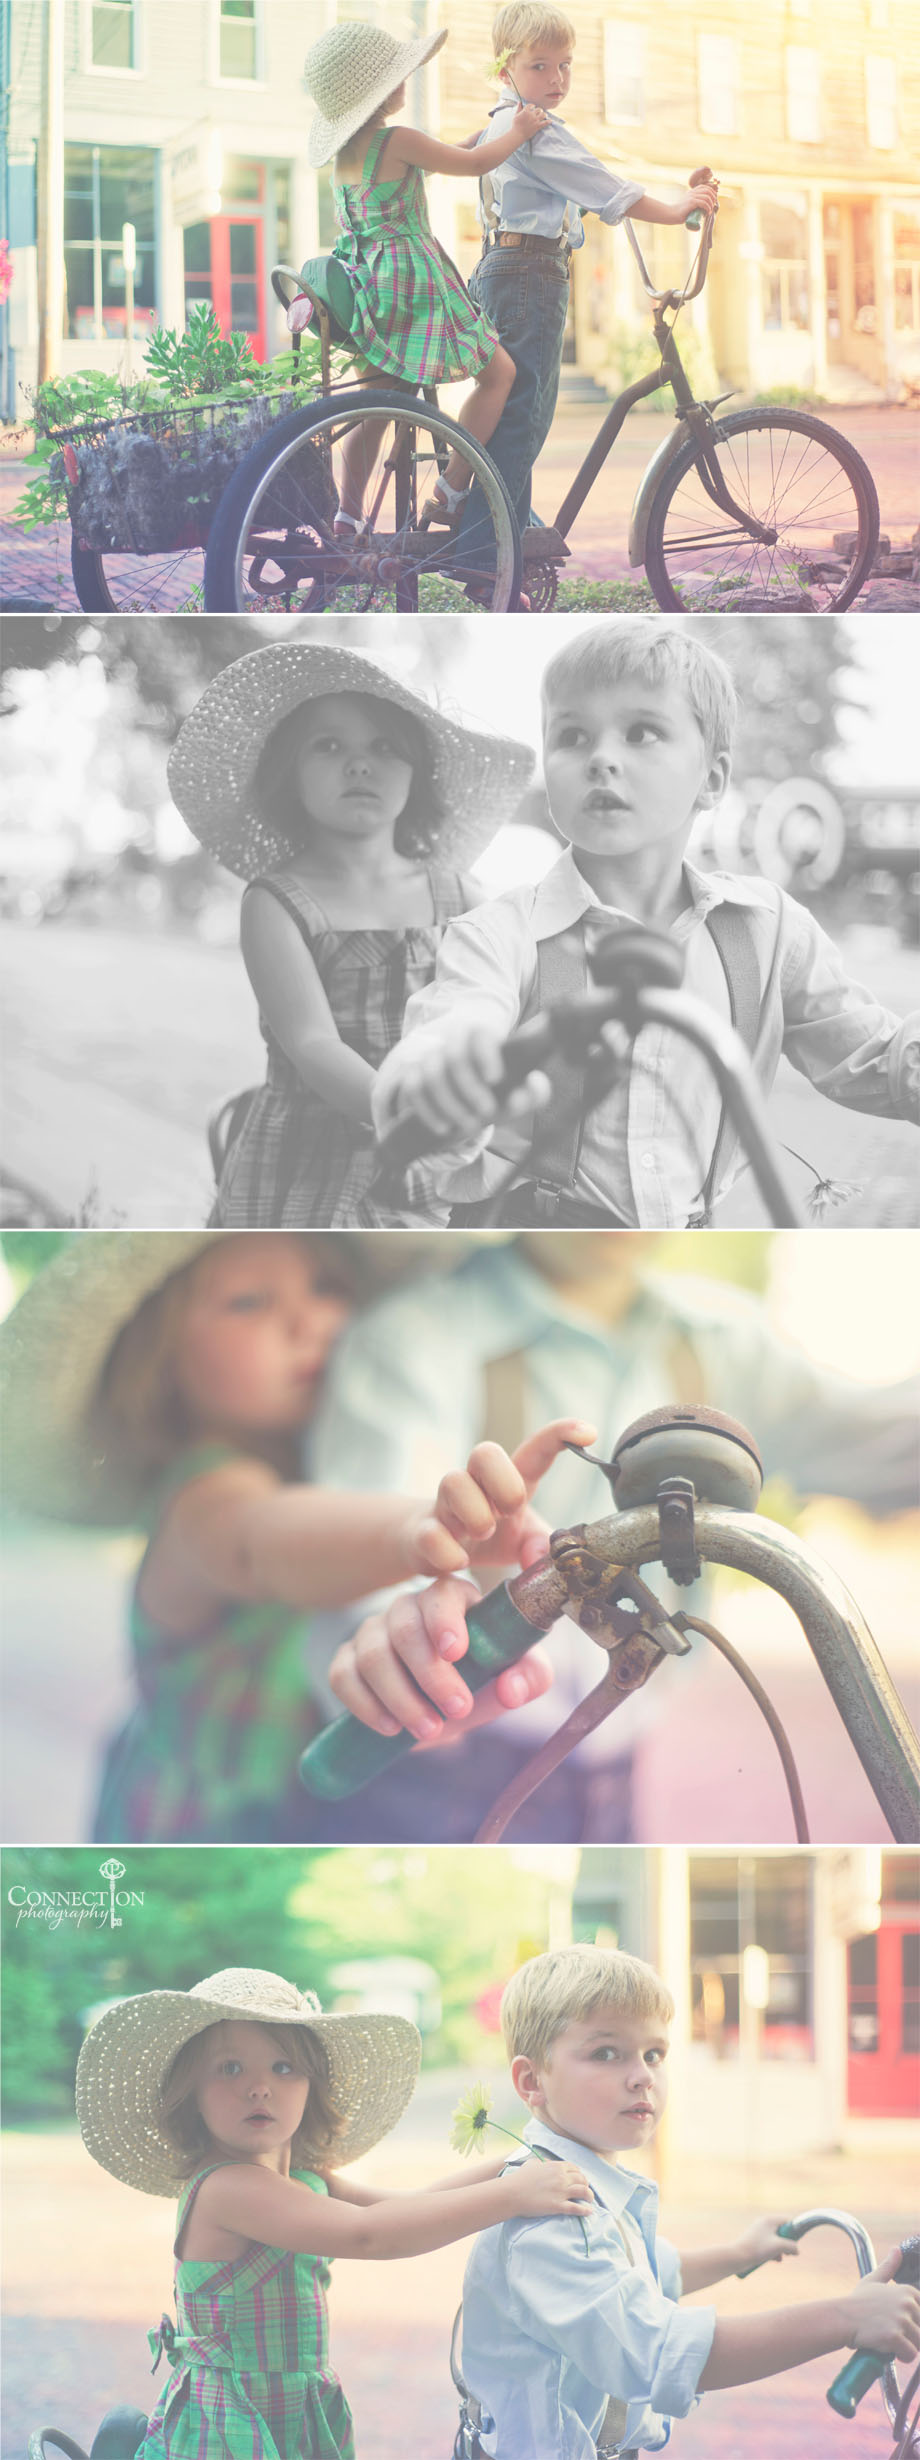 You and I could take a ride (creative lifestyle photography}